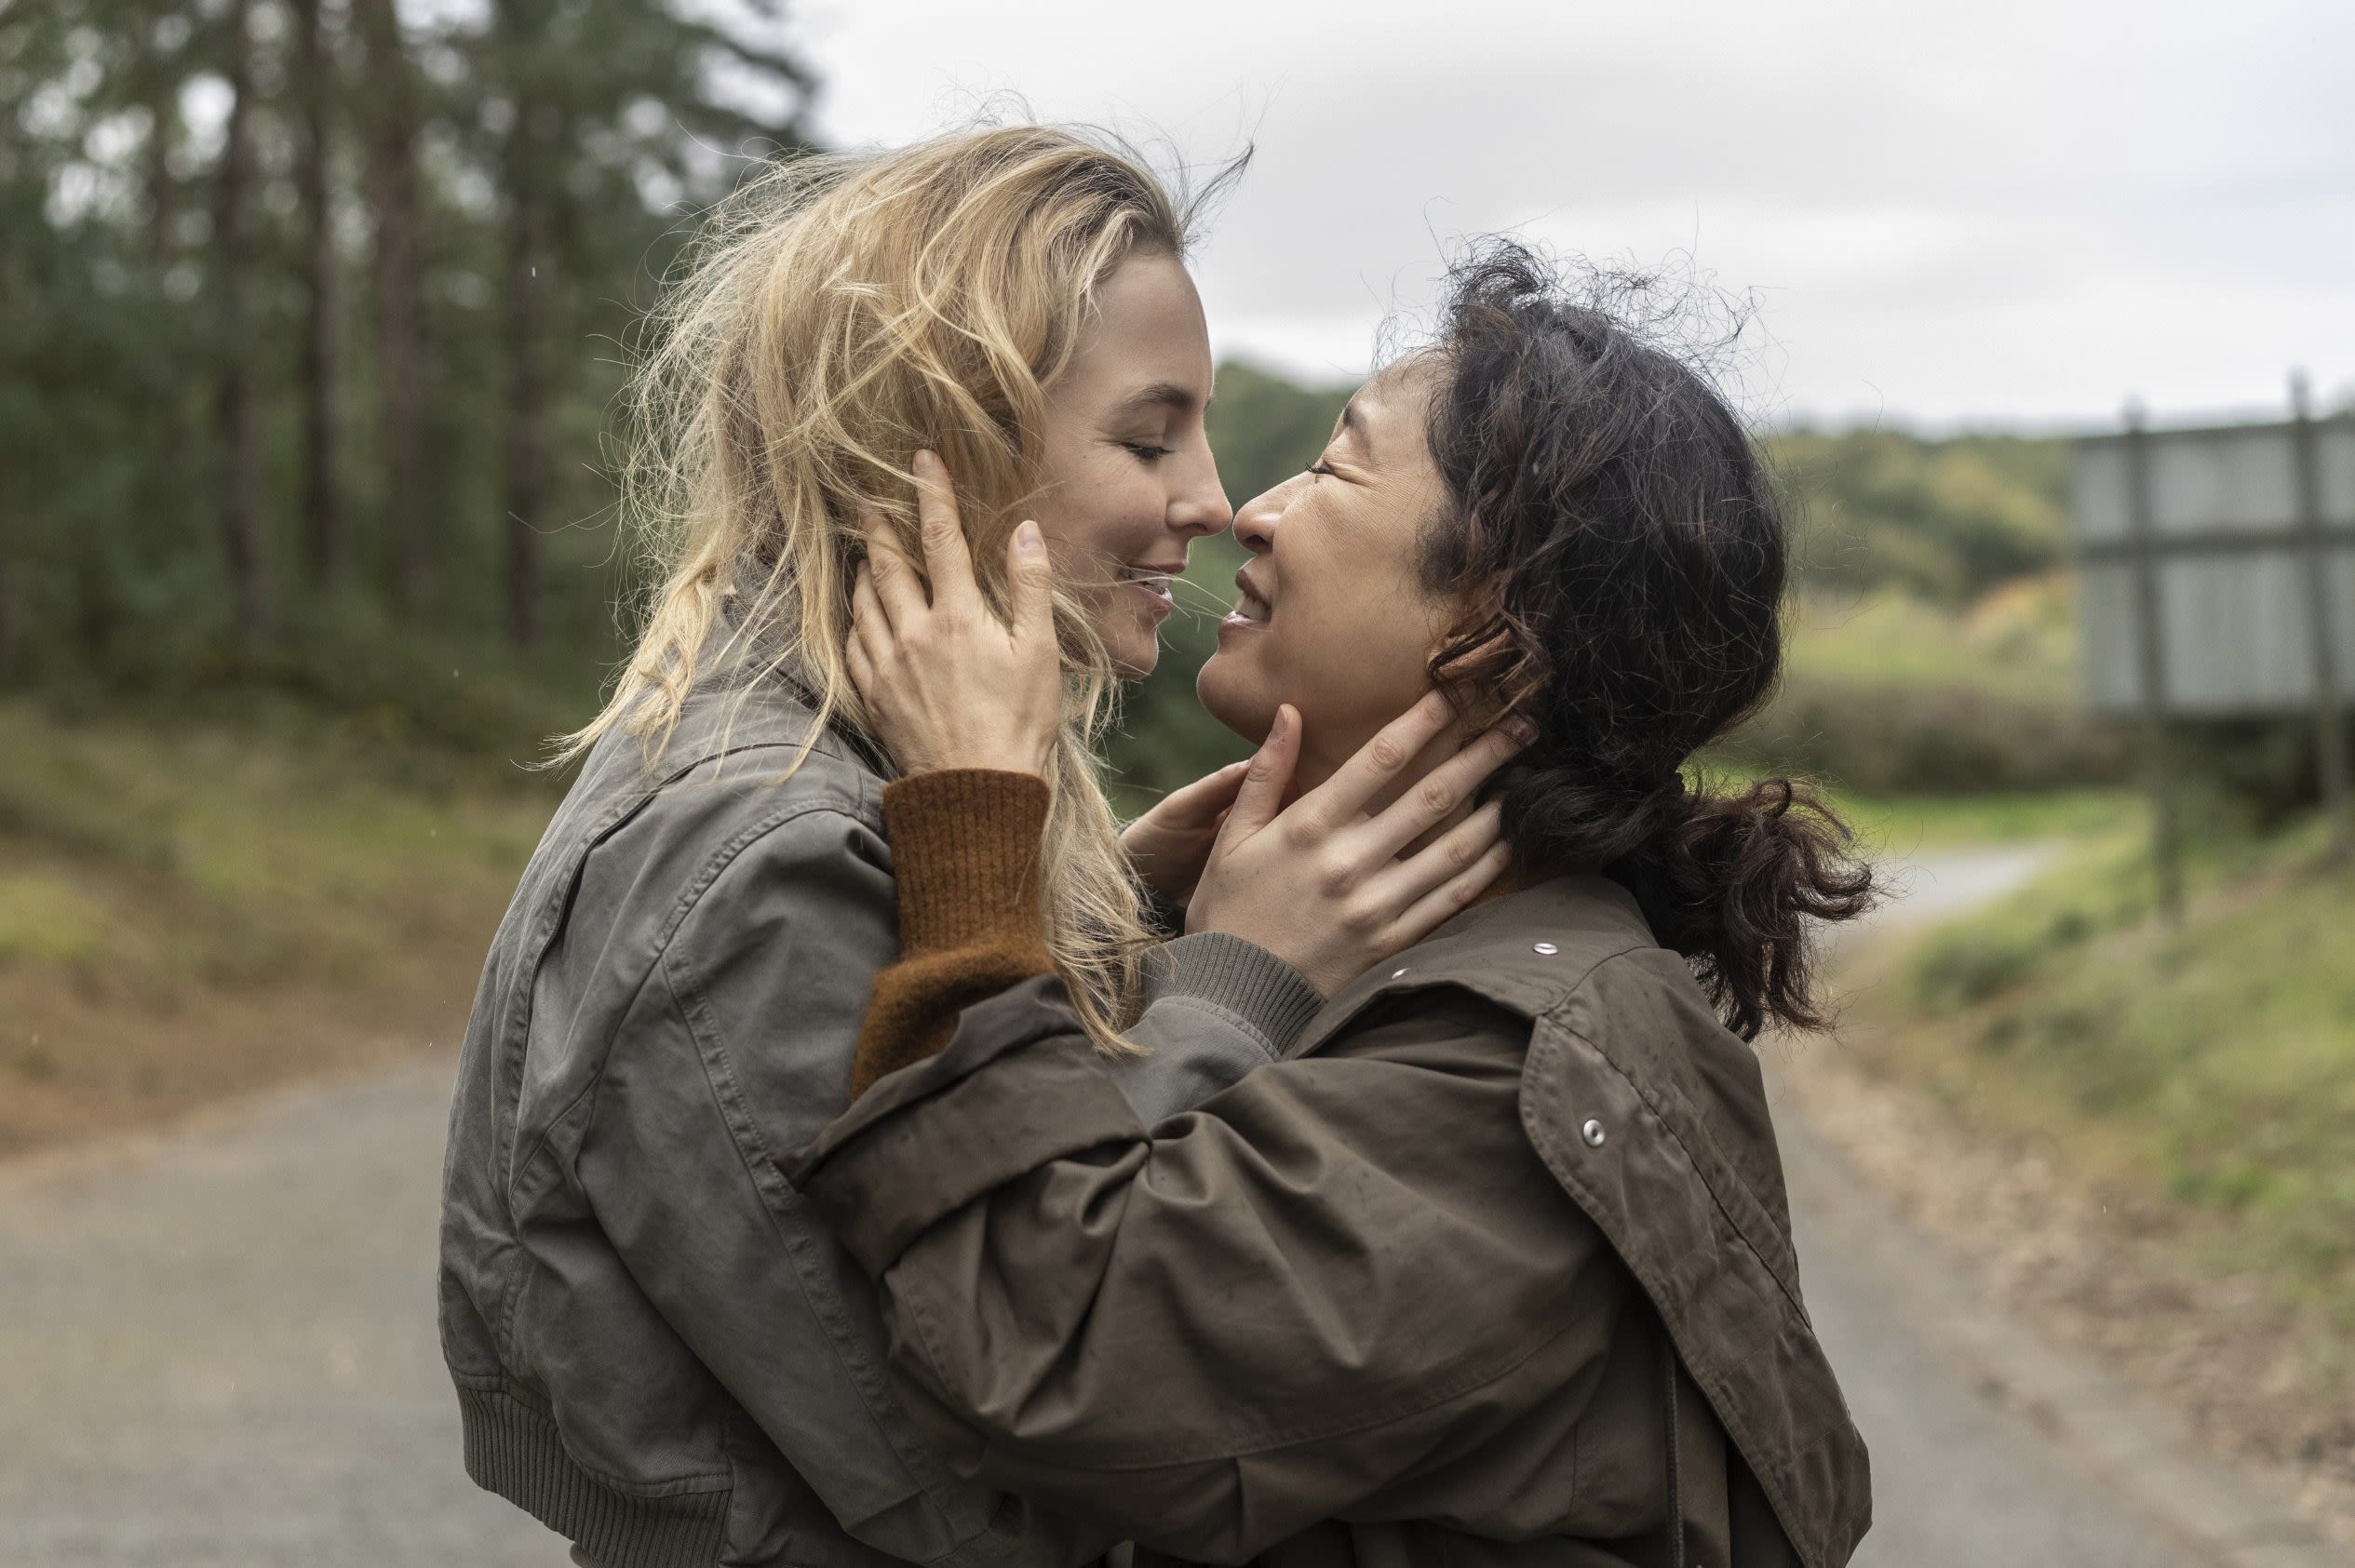 Nielsen Streaming Top 10: ‘Killing Eve’ Charts After Netflix Debut With Surprising Popularity Among Viewers Age 65+, ‘Fallout’ Breaks...